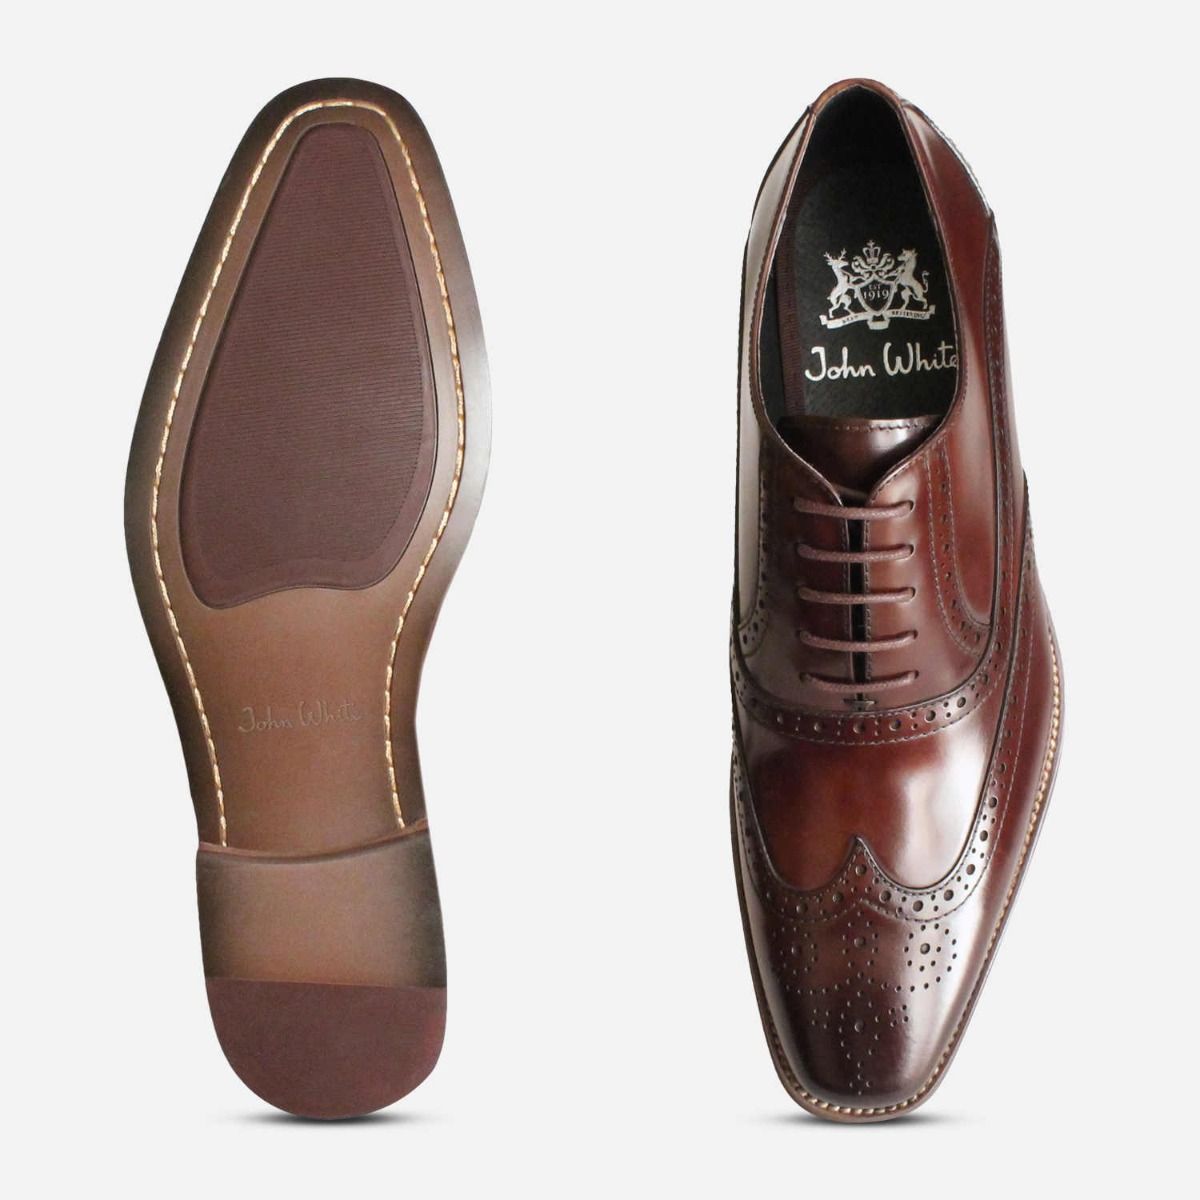 Premium Oxford Brogues in Brown Polished by John White